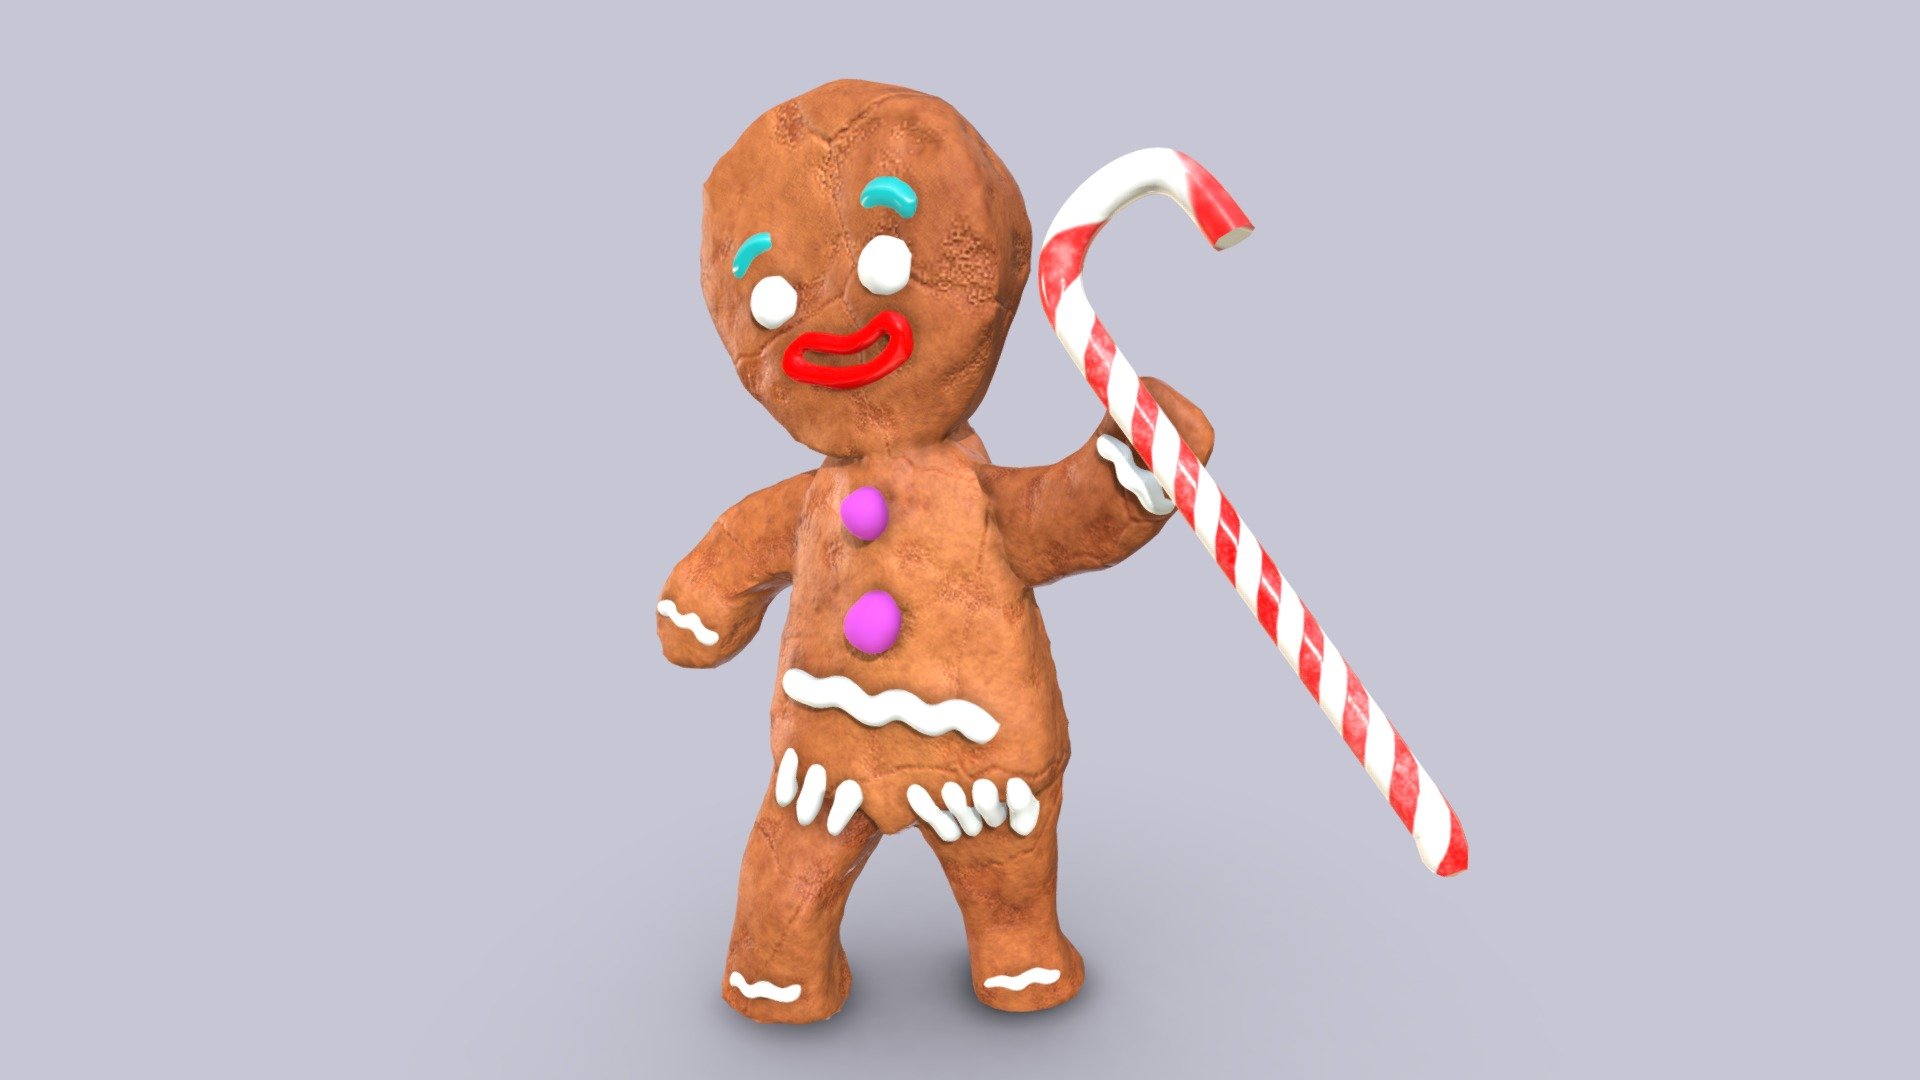 nodevember 001 - cookie / 002 - candy


Proccess:

Cookie

Candy and procedural baston

Rotation - Gingerbread man - 3D model by Cristian Brevis Acevedo (@cbrevis) 3d model